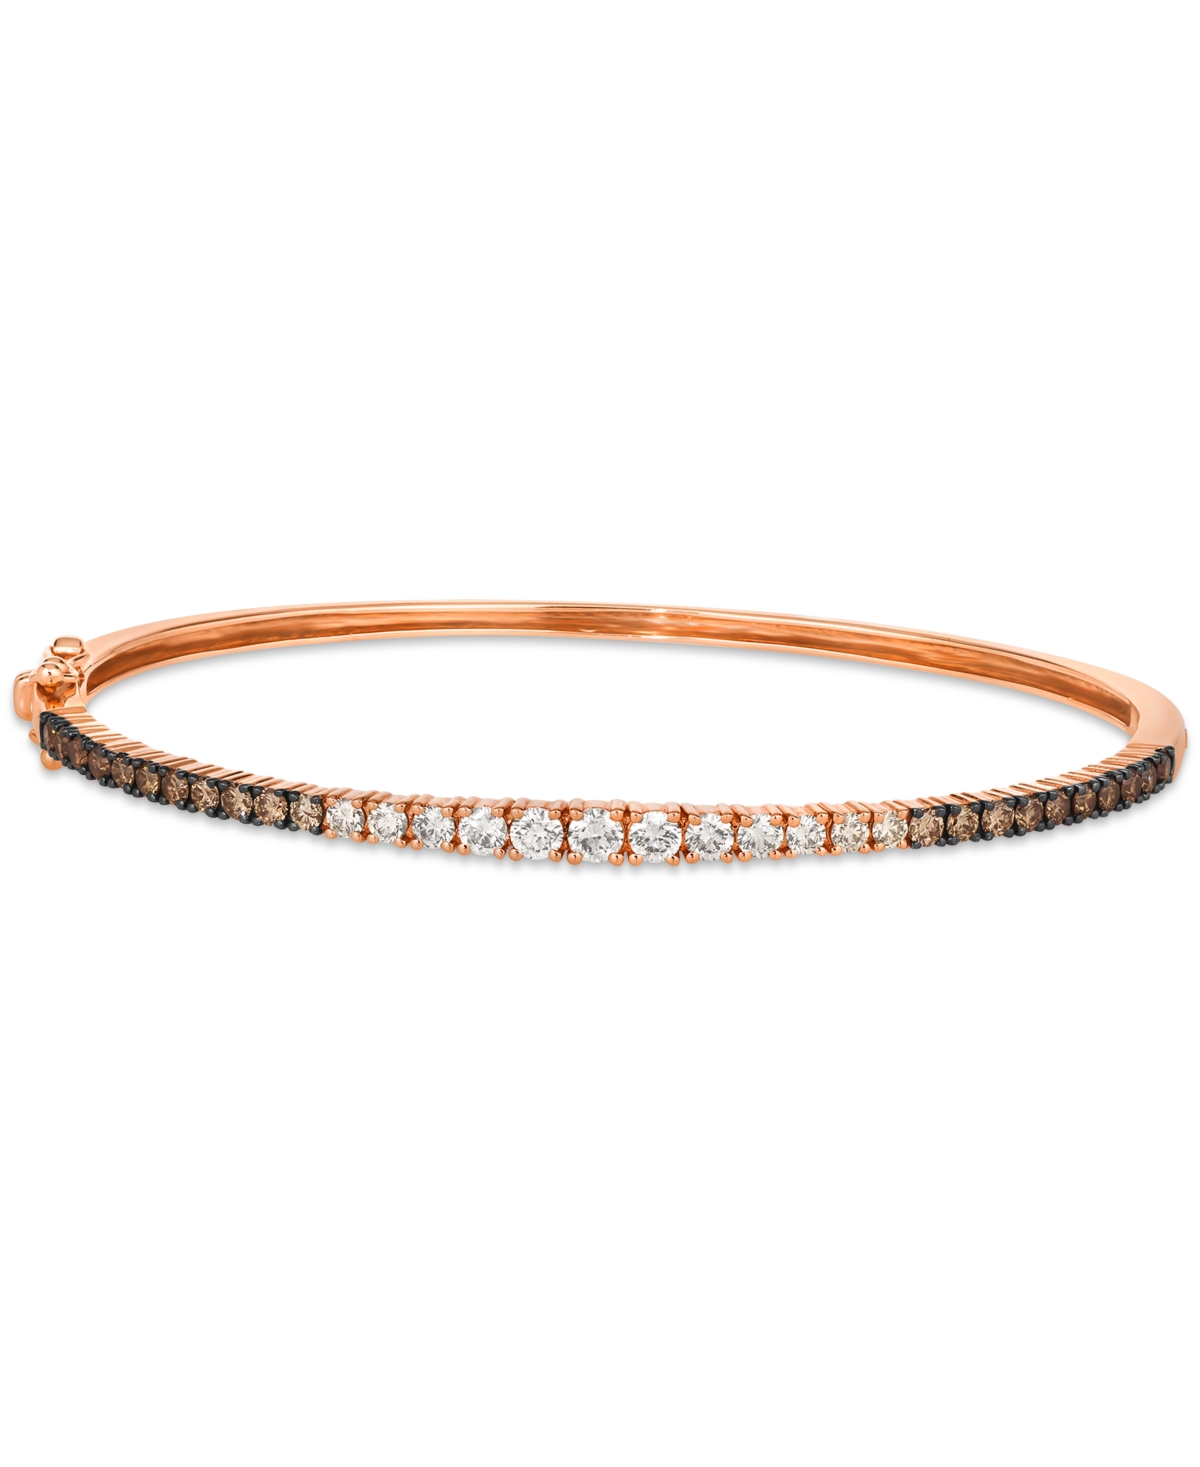 Ombre Chocolate Ombre Diamond Bangle Bracelet (1-1/3 ct. t.w.) in 14k Gold (Also Available in Rose Gold and White Gold) - White Gold